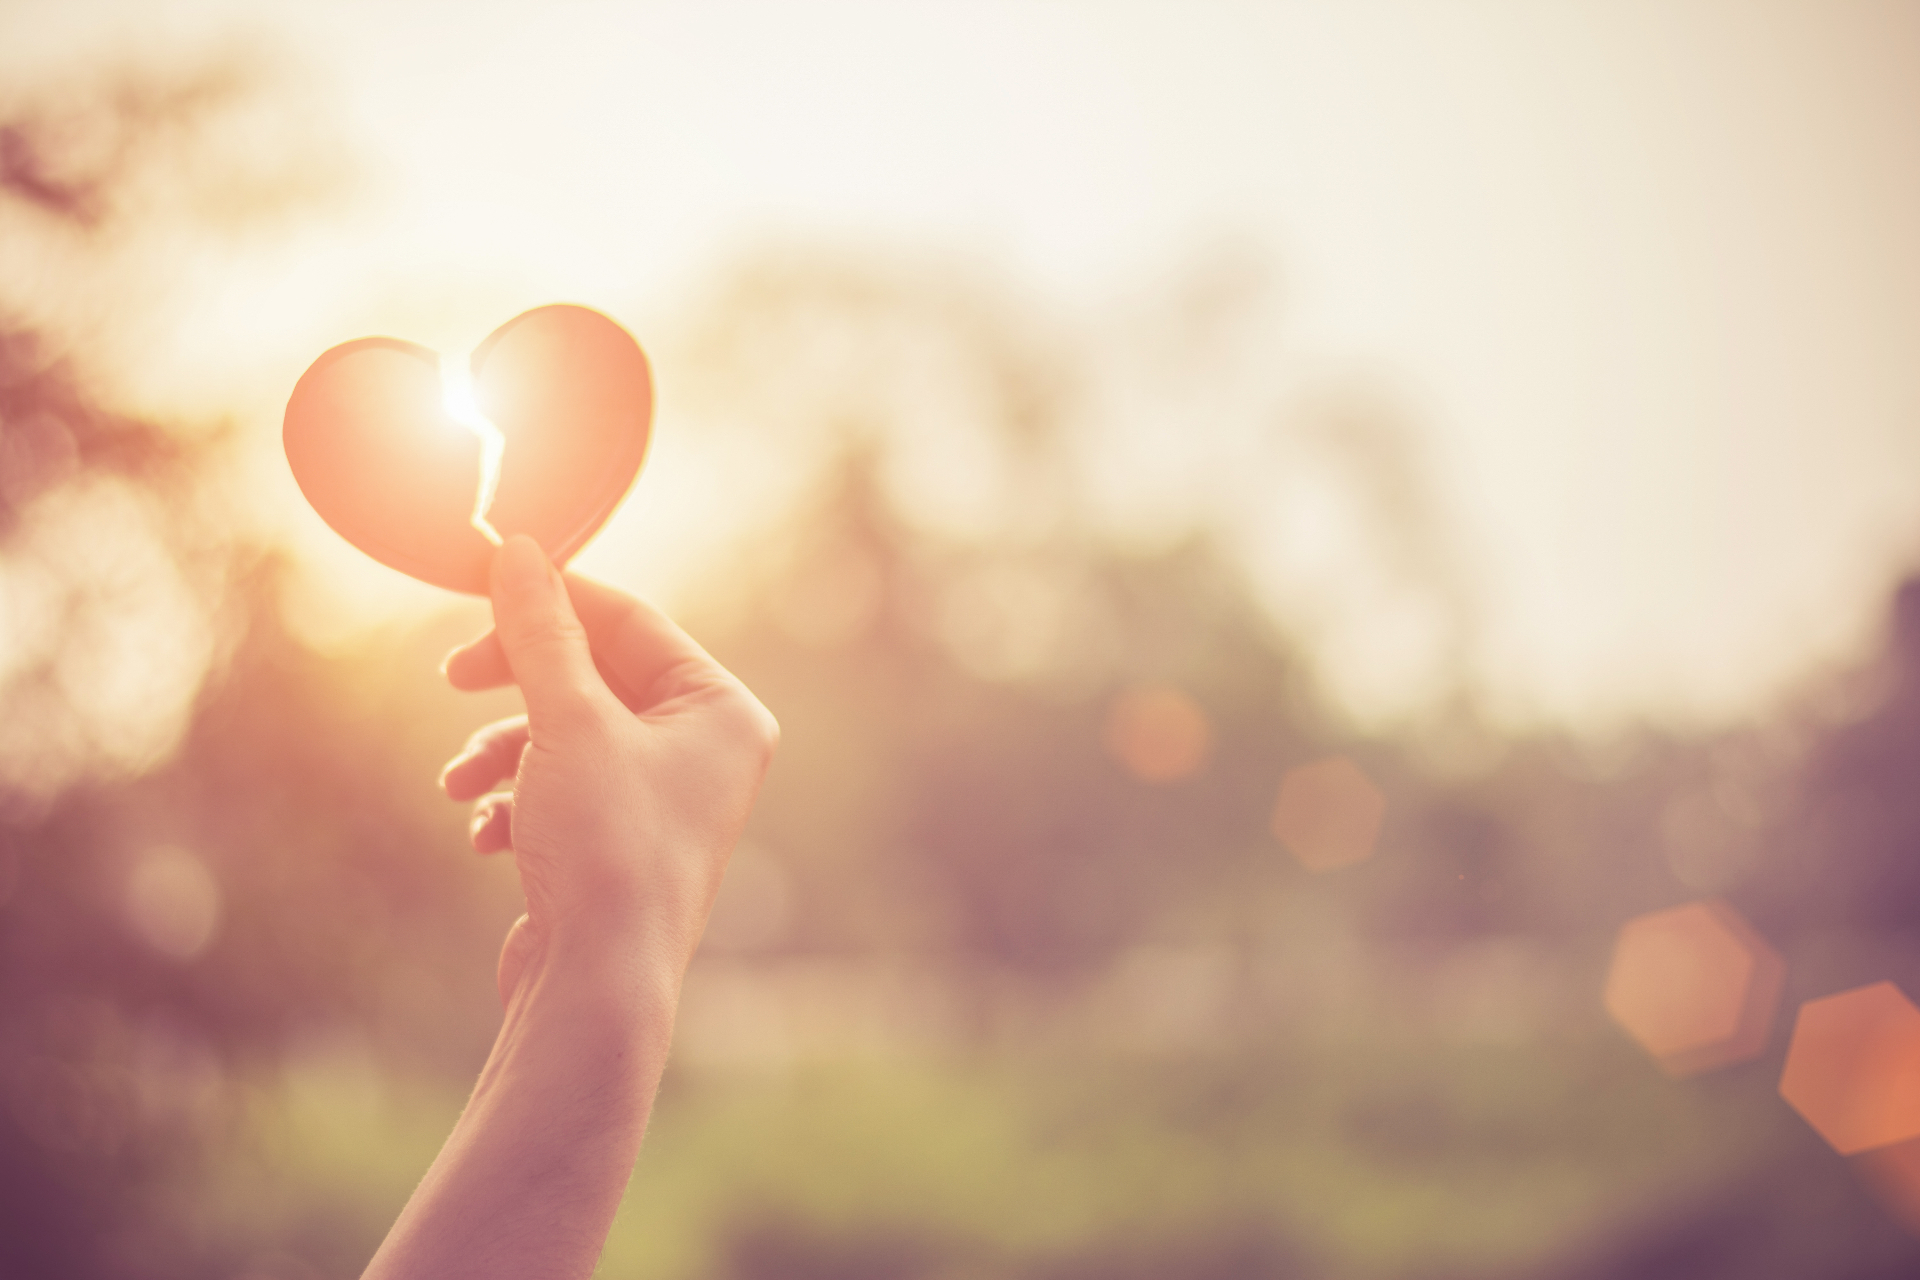 A person holds a paper heart ripped down the middle against the sunlight. Learn how EMDR in Palm Beach, FL area can help you cope with grief and loss. Learn more about EMDR therapy in Delray Beach, FL and other services by contacting an EMDR therapist in Palm Beach, FL today.